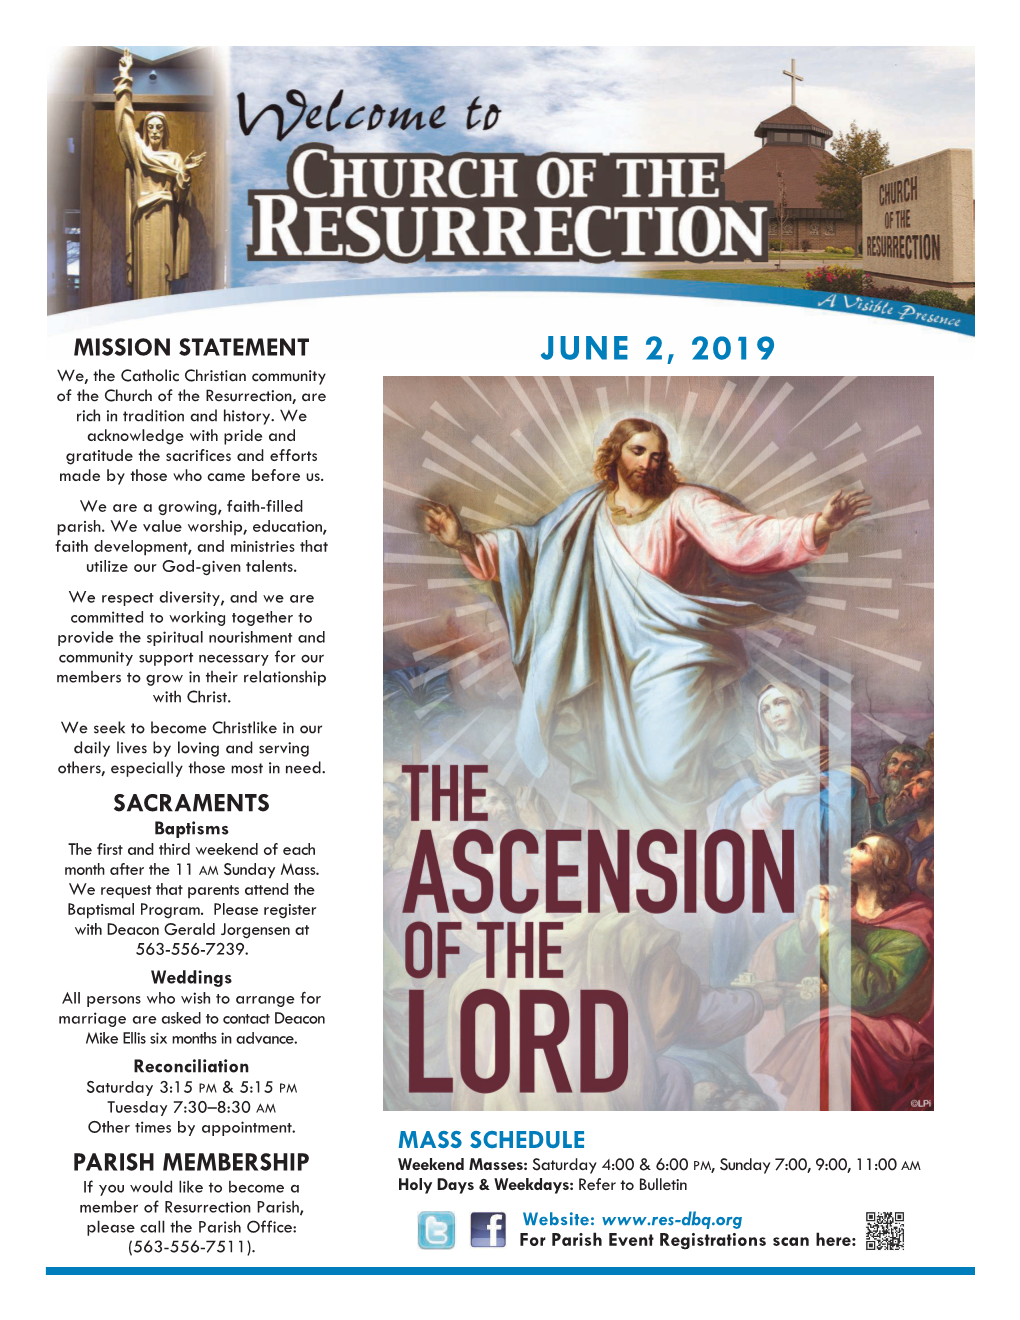 JUNE 2, 2019 We, the Catholic Christian Community of the Church of the Resurrection, Are Rich in Tradition and History